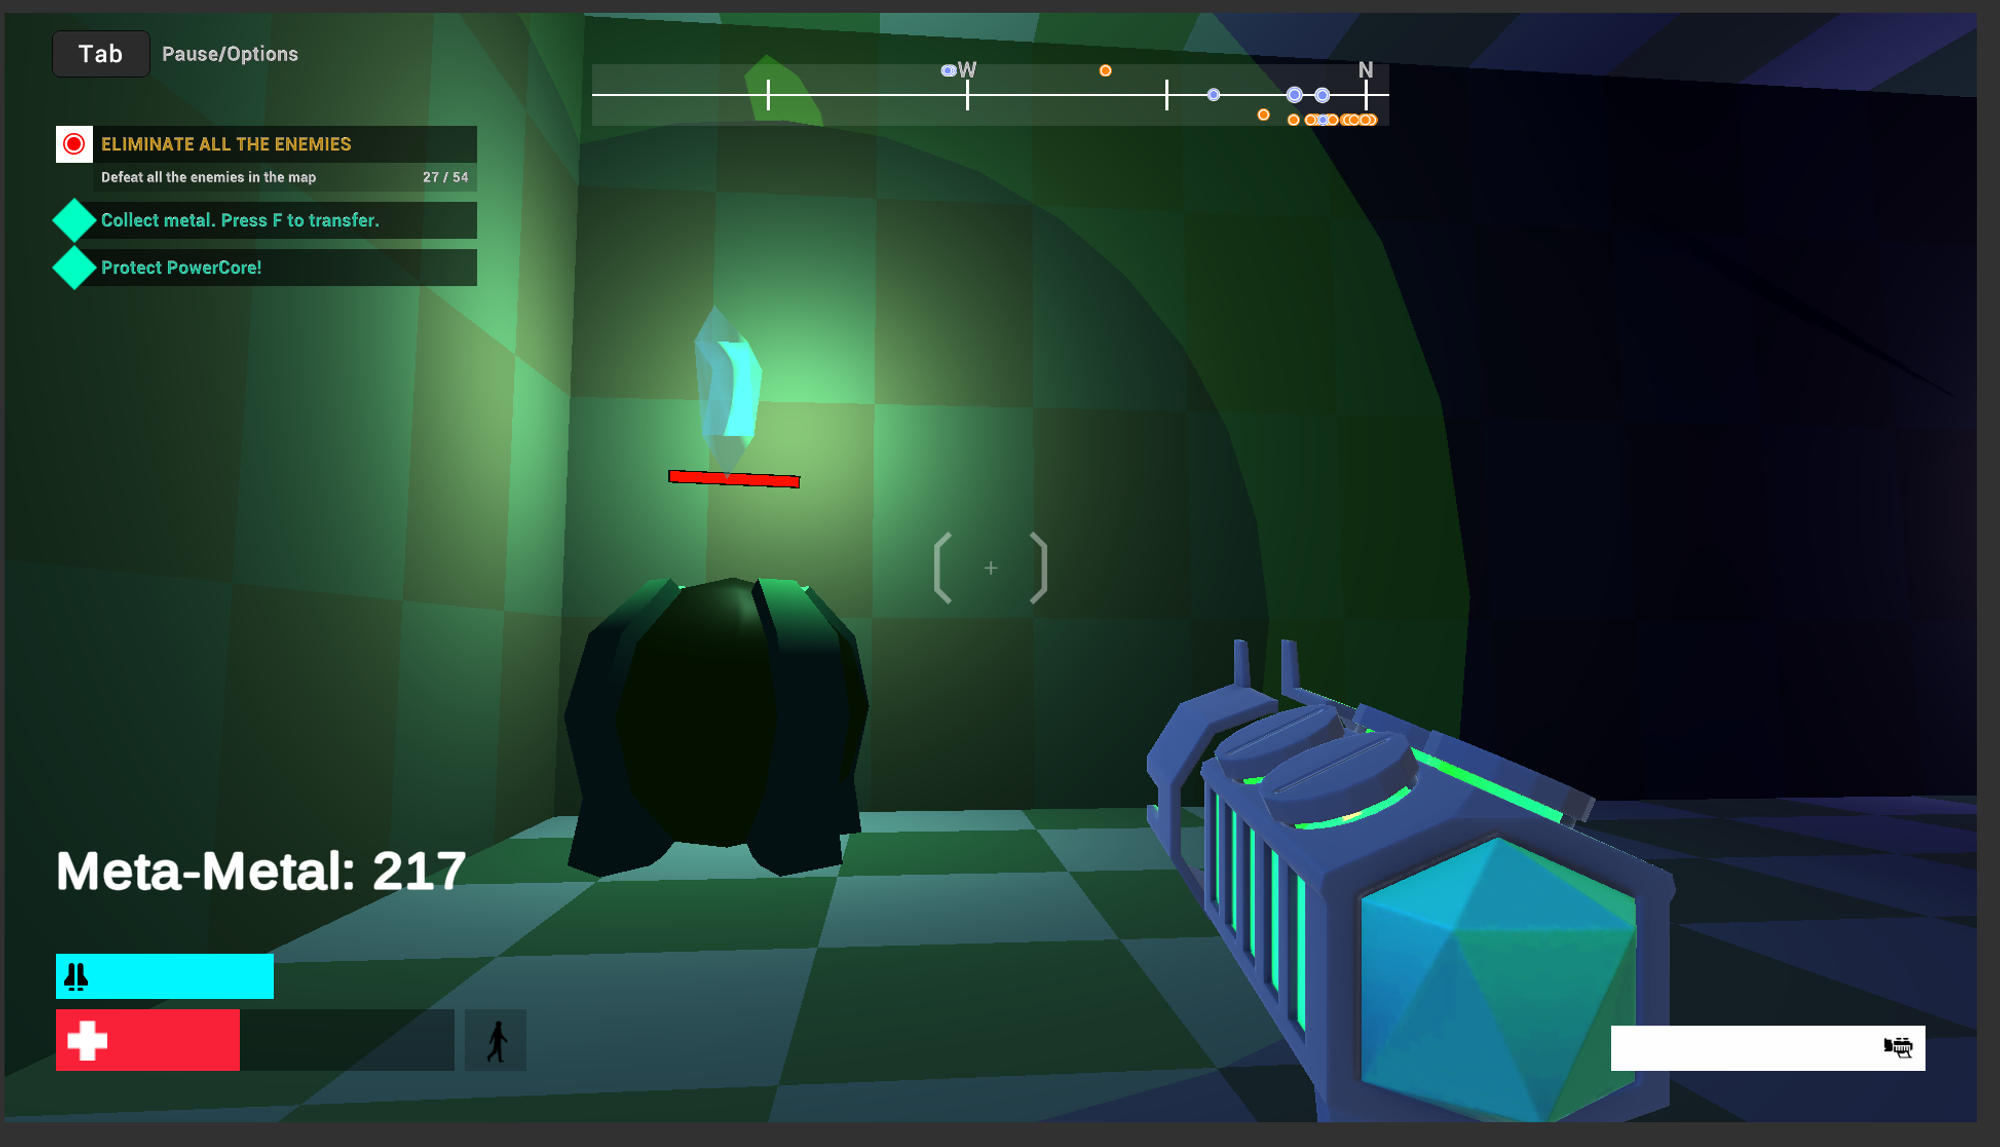 The player spawn unit has a green aura around it to indicate it is a healing sphere.  The Goal indicators in the top left give the player instructions on how to further use the friendly spawn unit.  Under its own power, it generates a set amount of meta-metal every second and eventually would spawn a friendly drone, but you can inject meta-metal into it by stepping close to it and holding F — allowing it to spawn friendly drones at a accelerated rate. 